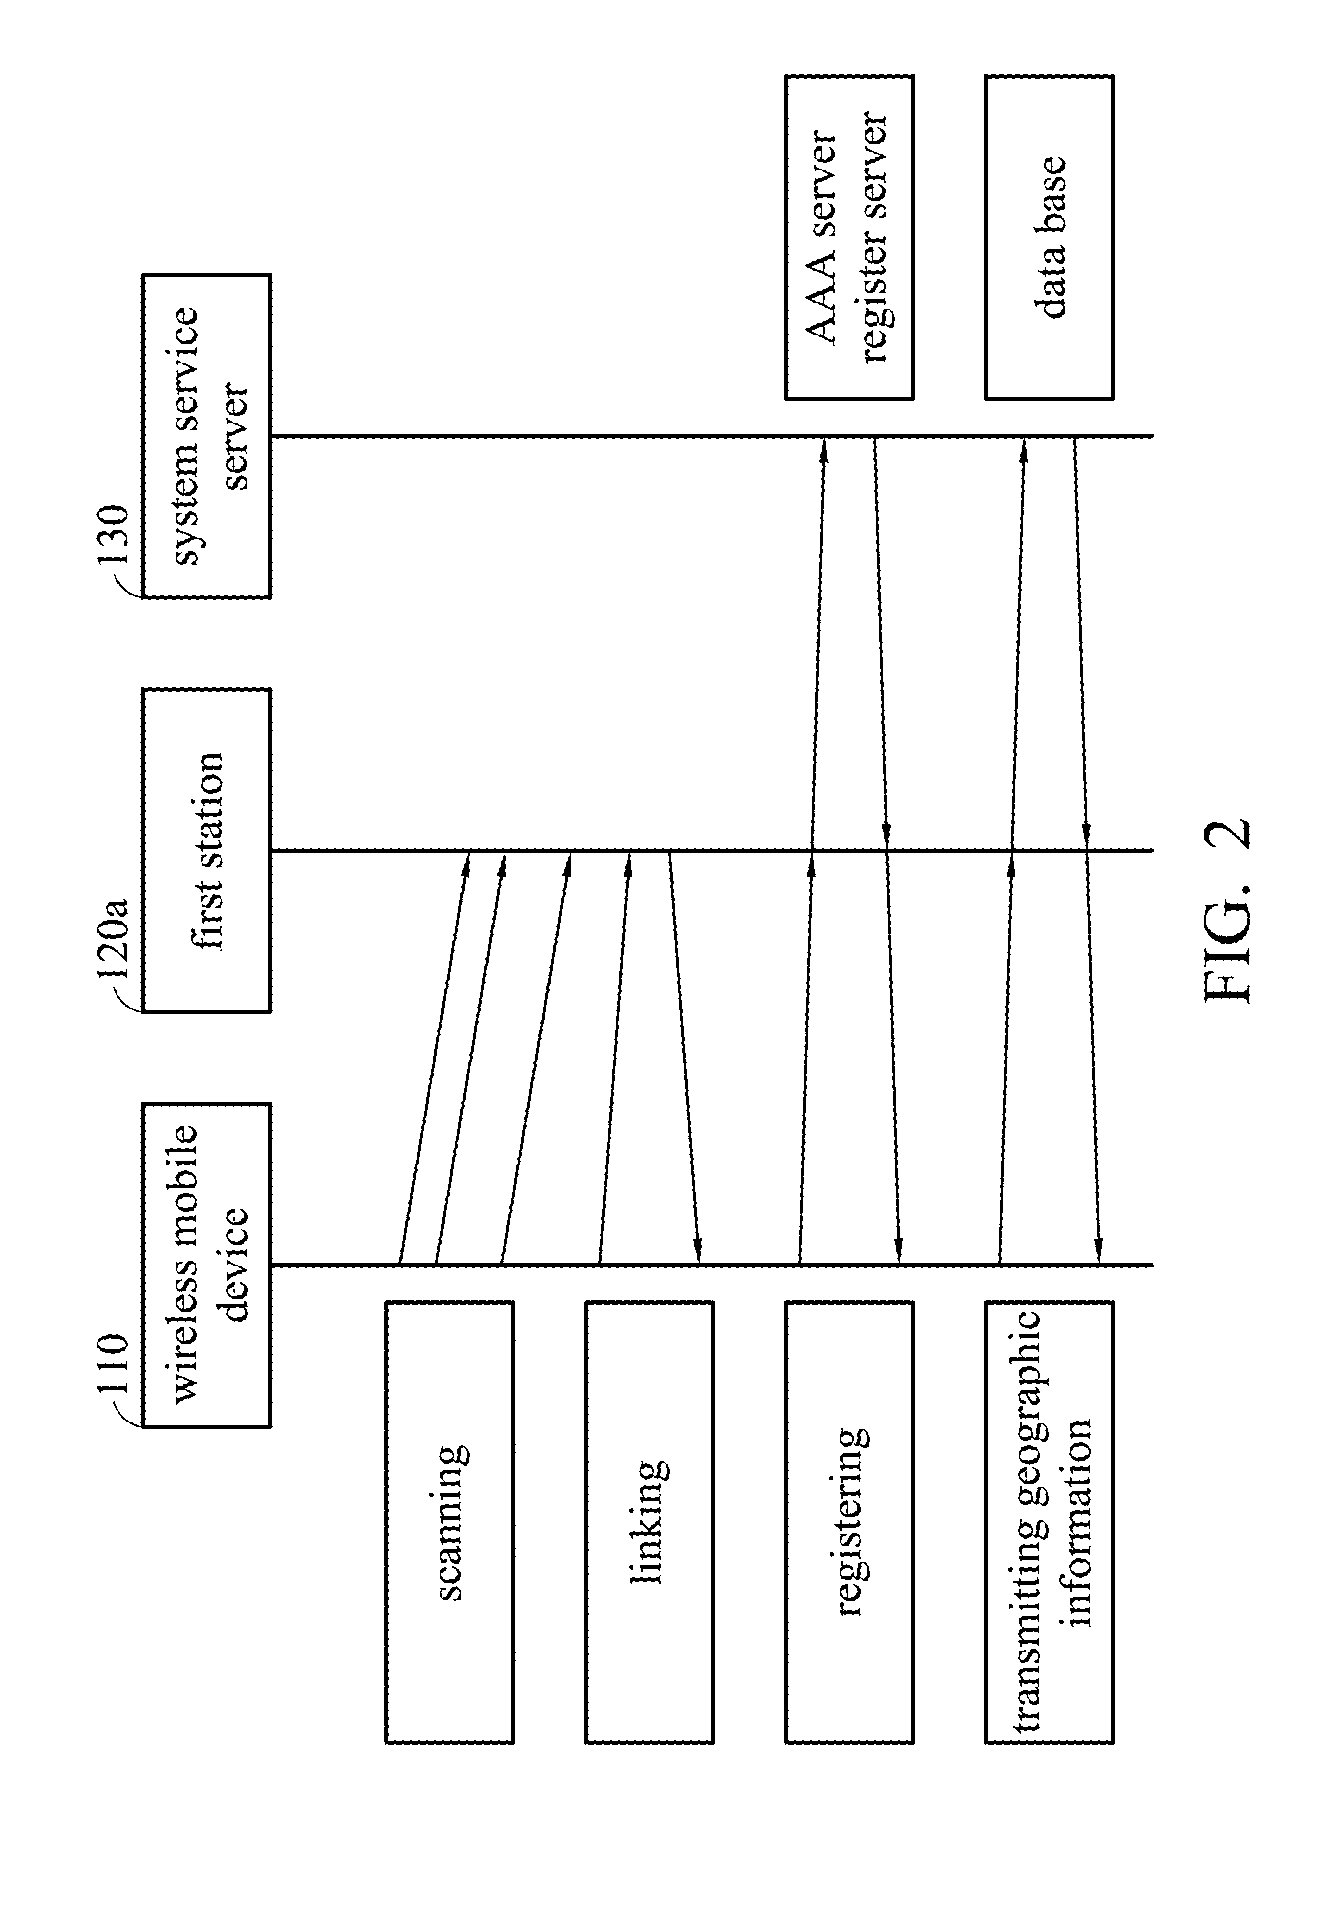 Wireless communication system for improving the handoff of the wireless mobile device according to geographic information and a method for improving handoff